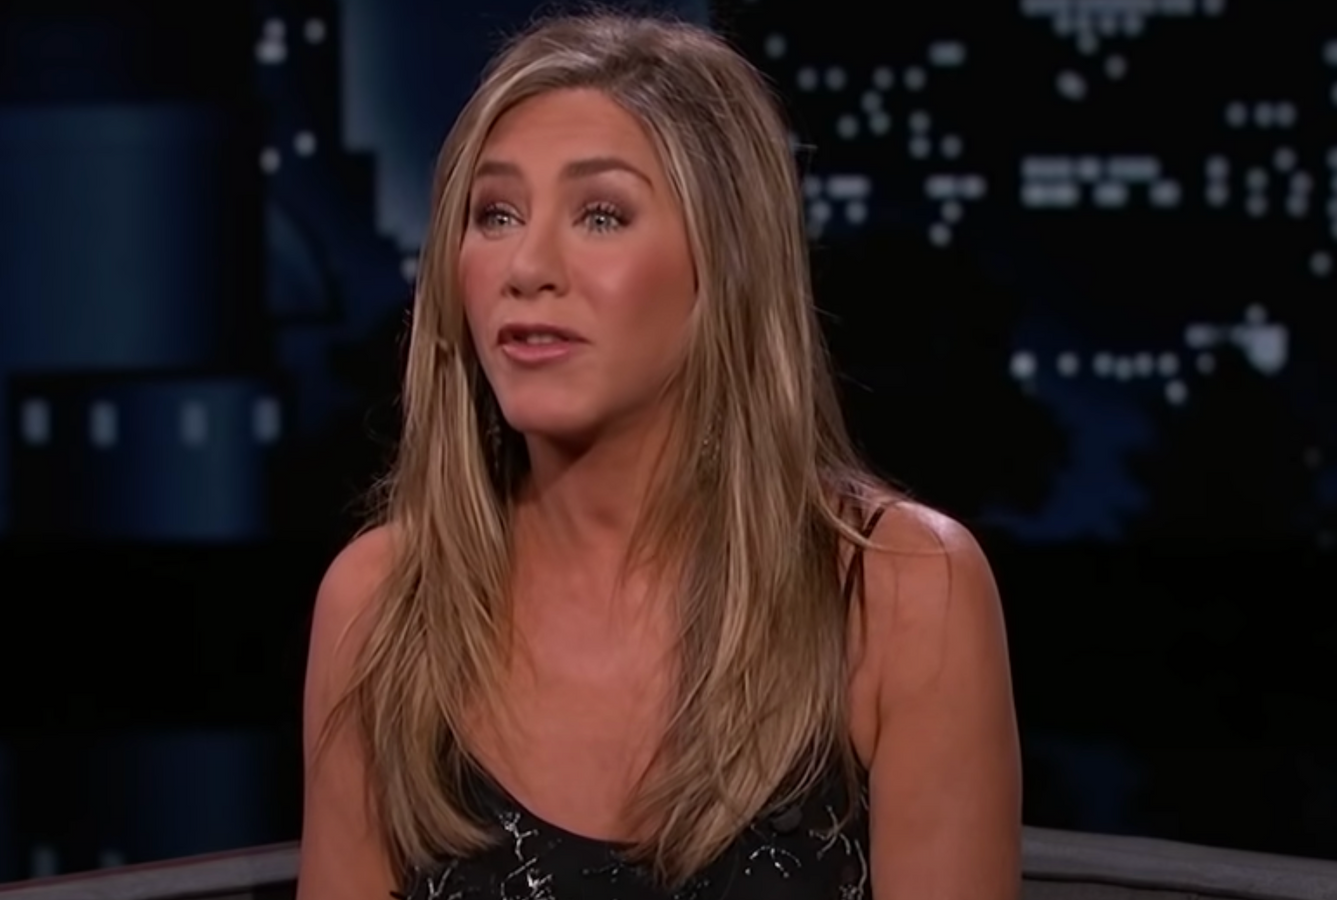 jennifer-aniston-refused-to-confirm-her-relationship-with-david-schwimmer-because-shes-guarded-with-men-friends-alum-called-her-co-star-brother